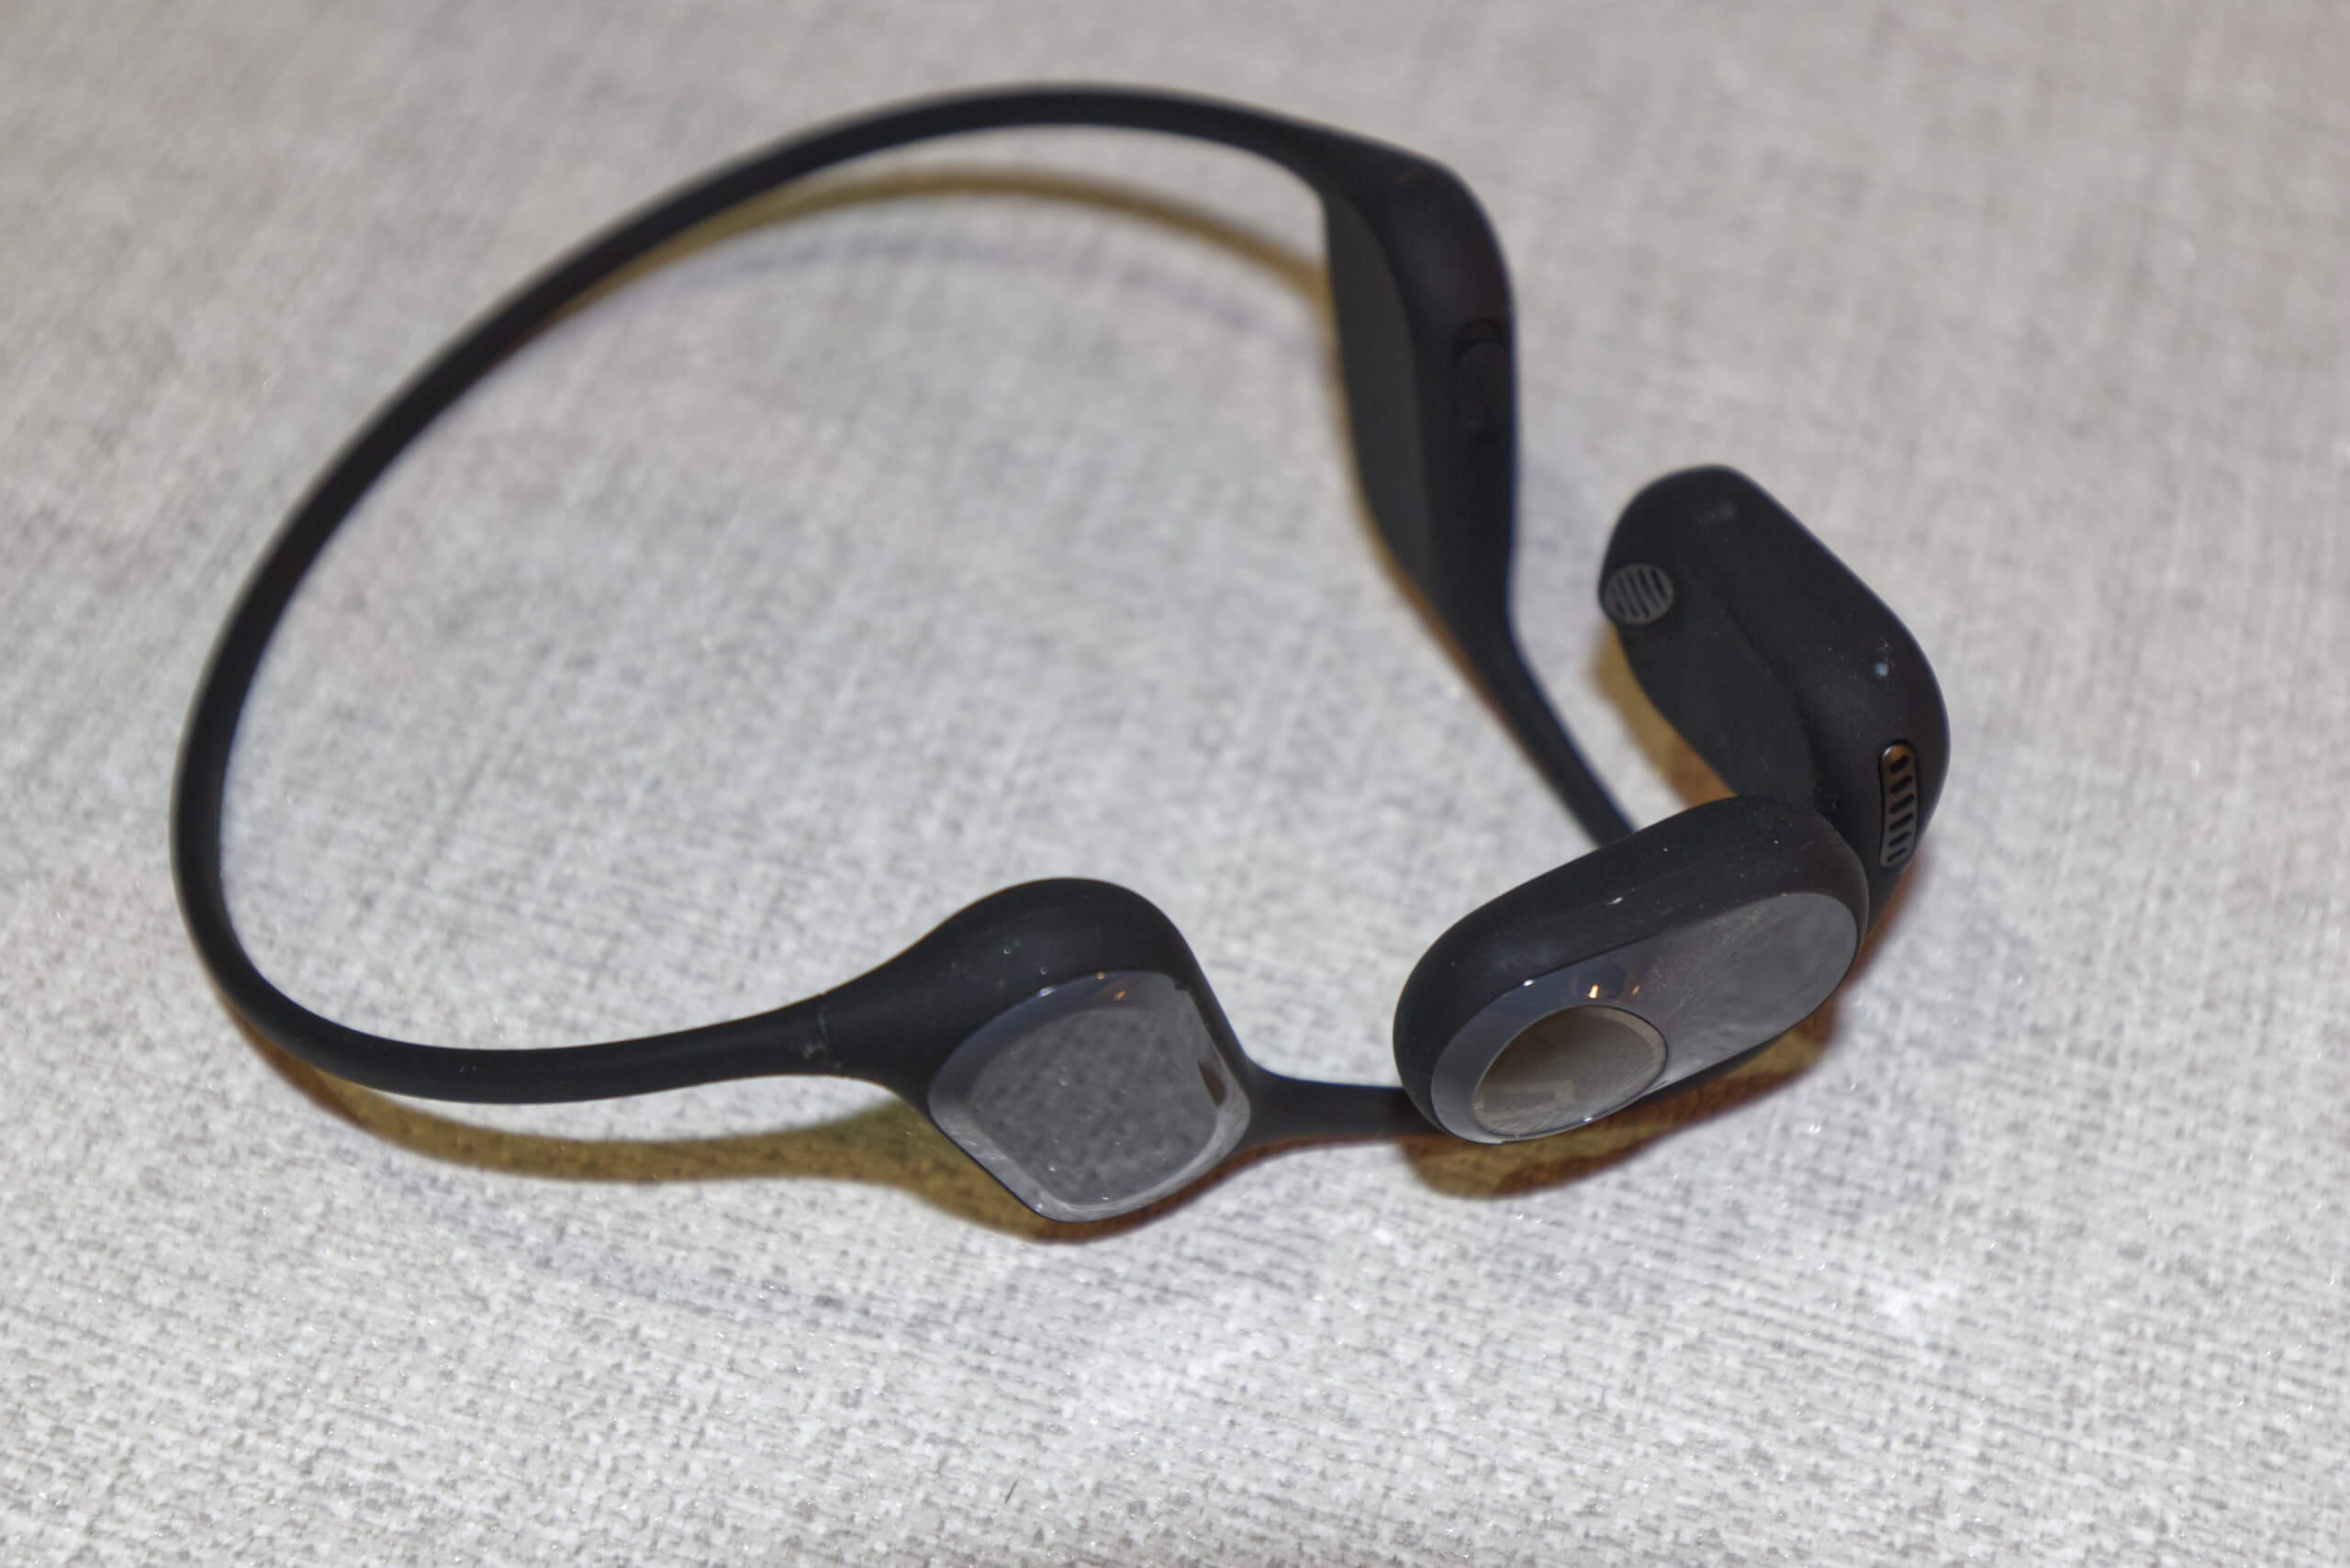 Photo of the SoundPeats headphones by themselves, showing the headband. The headphones are black with grey highlights, and the silicone headband is black all round